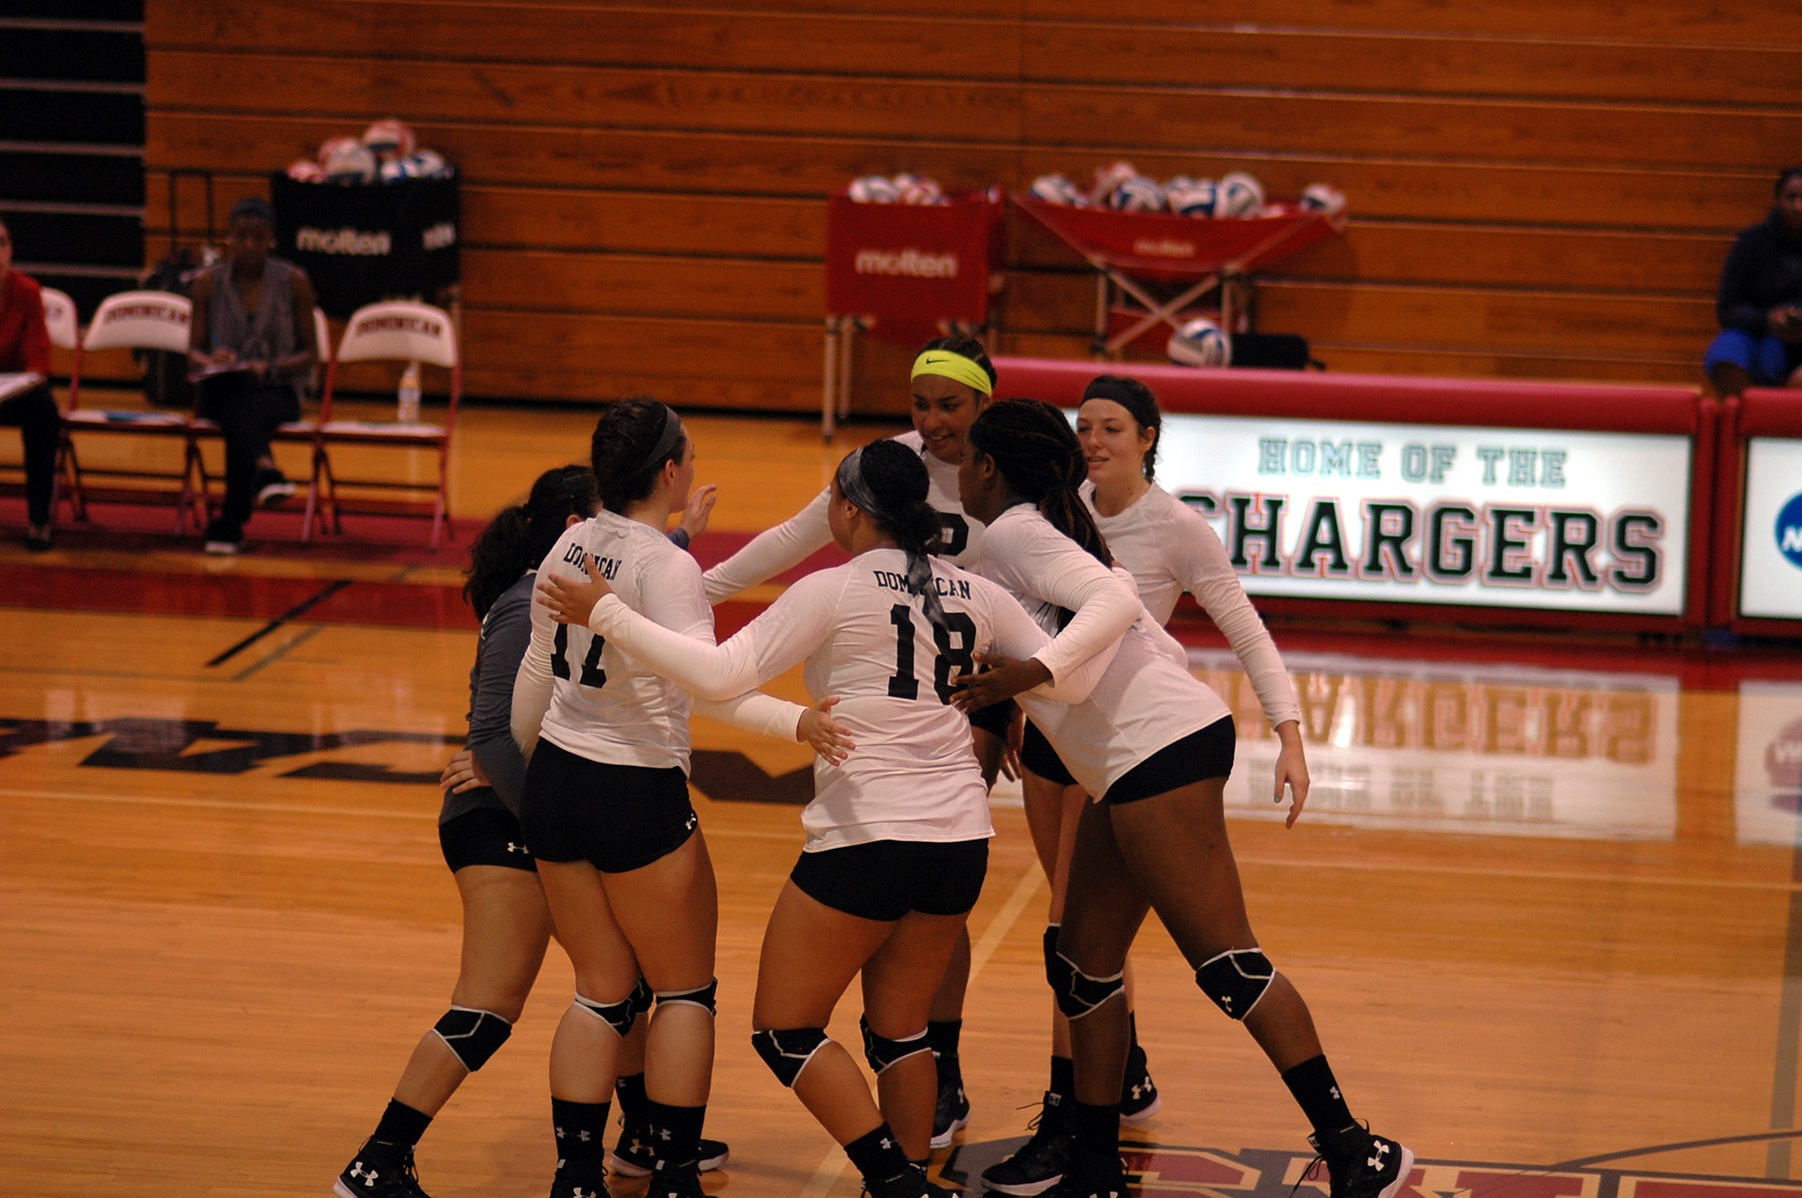 GRIFFINS OUTLAST LADY CHARGERS